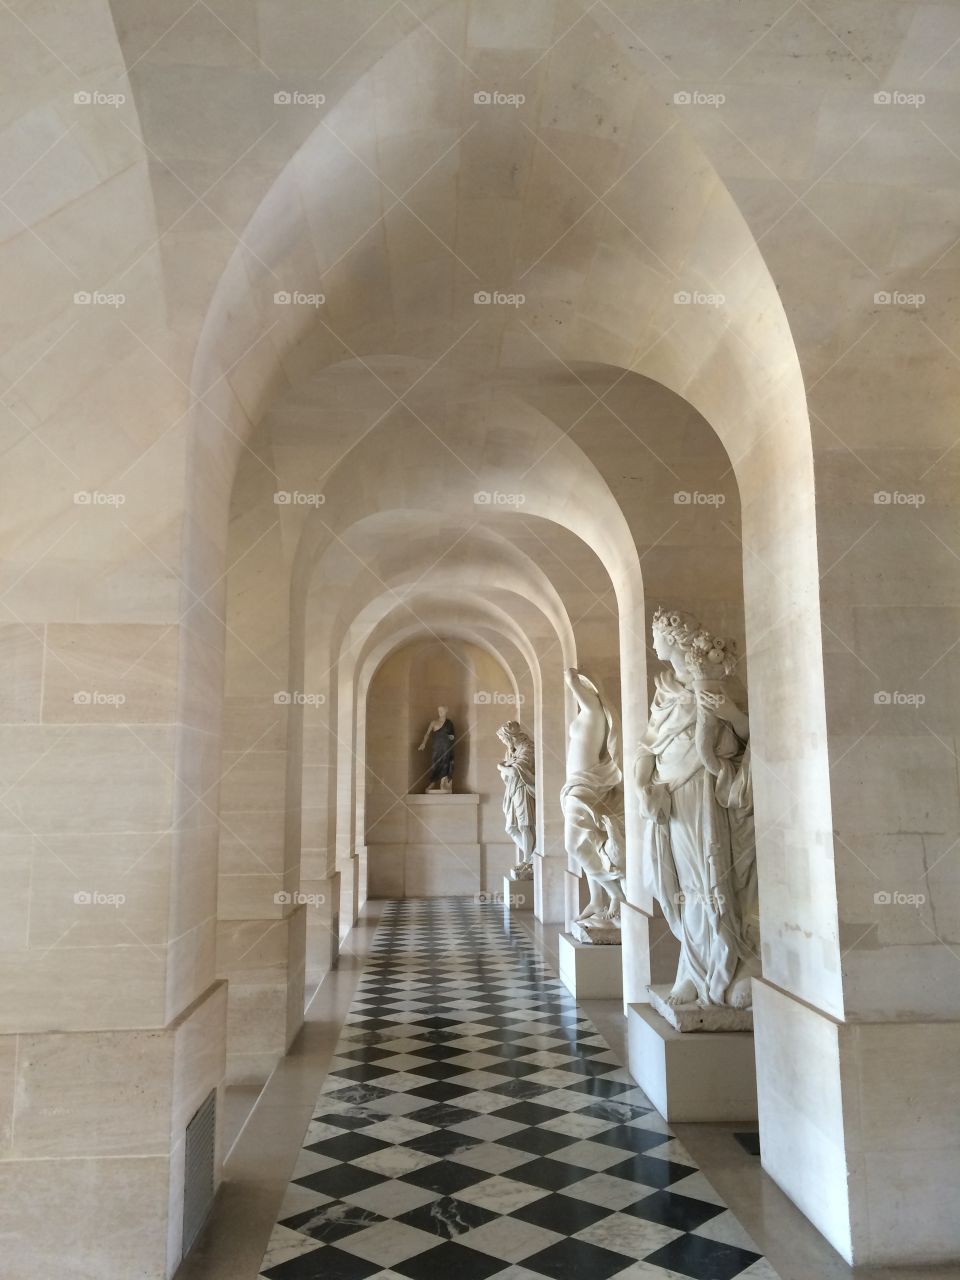 Art and architecture in the Palace of Versailles